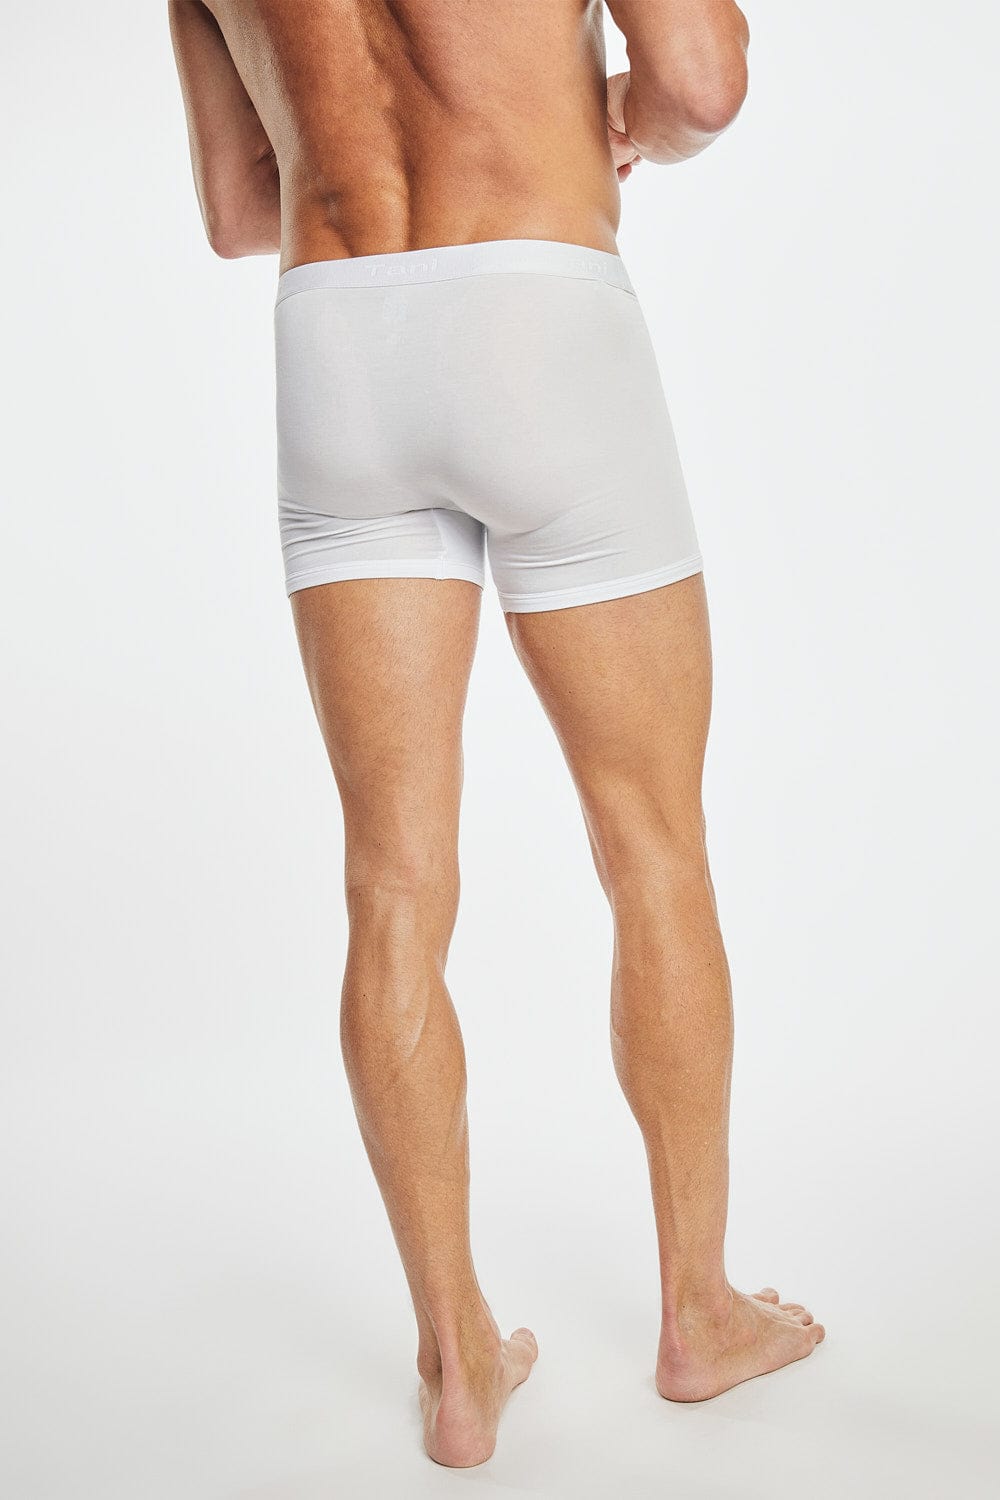 Here's Why You Need to Get Silk Comfy Briefs from Tani USA - Fashionably  Male